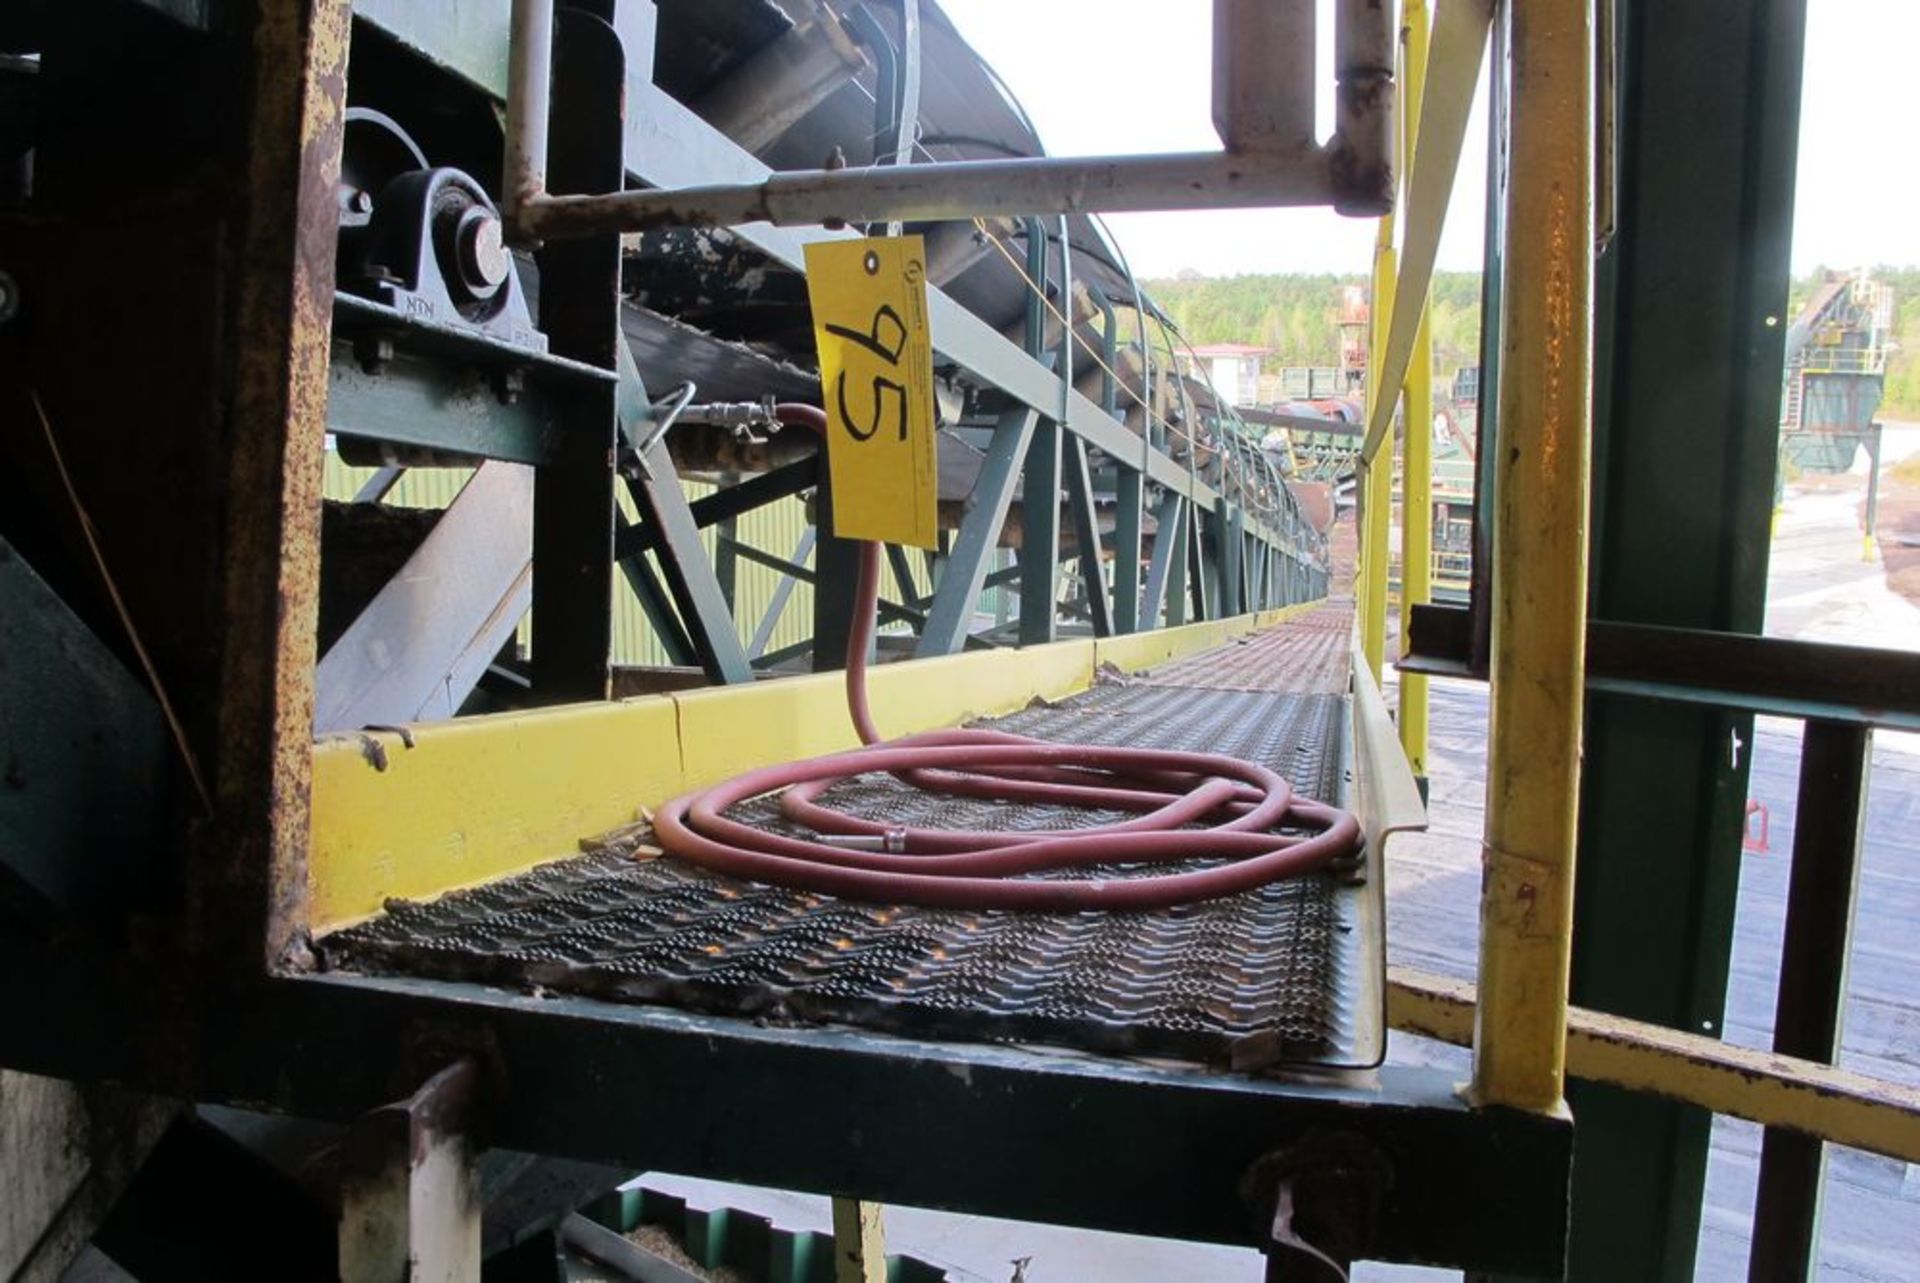 LOT OF 2 45"W INCLINE RUBBERT BELT CONVEYORS 80'L AND 120'L FROM CHIPPER BLDG TO TOP FLOOR OF WOOD - Image 6 of 7